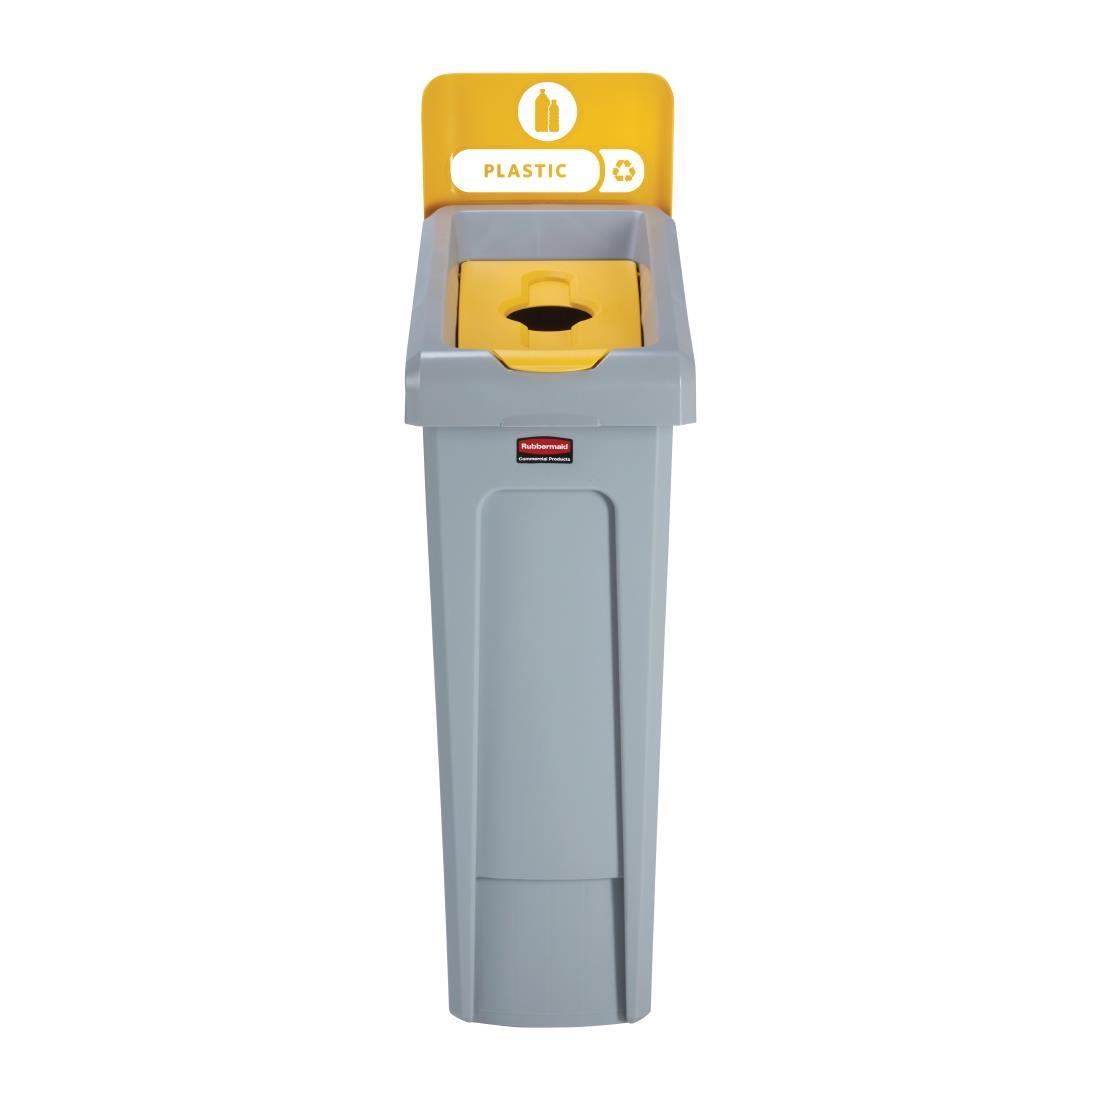 Rubbermaid Slim Jim Plastic Recycling Station Yellow 87Ltr - DY085  - 2